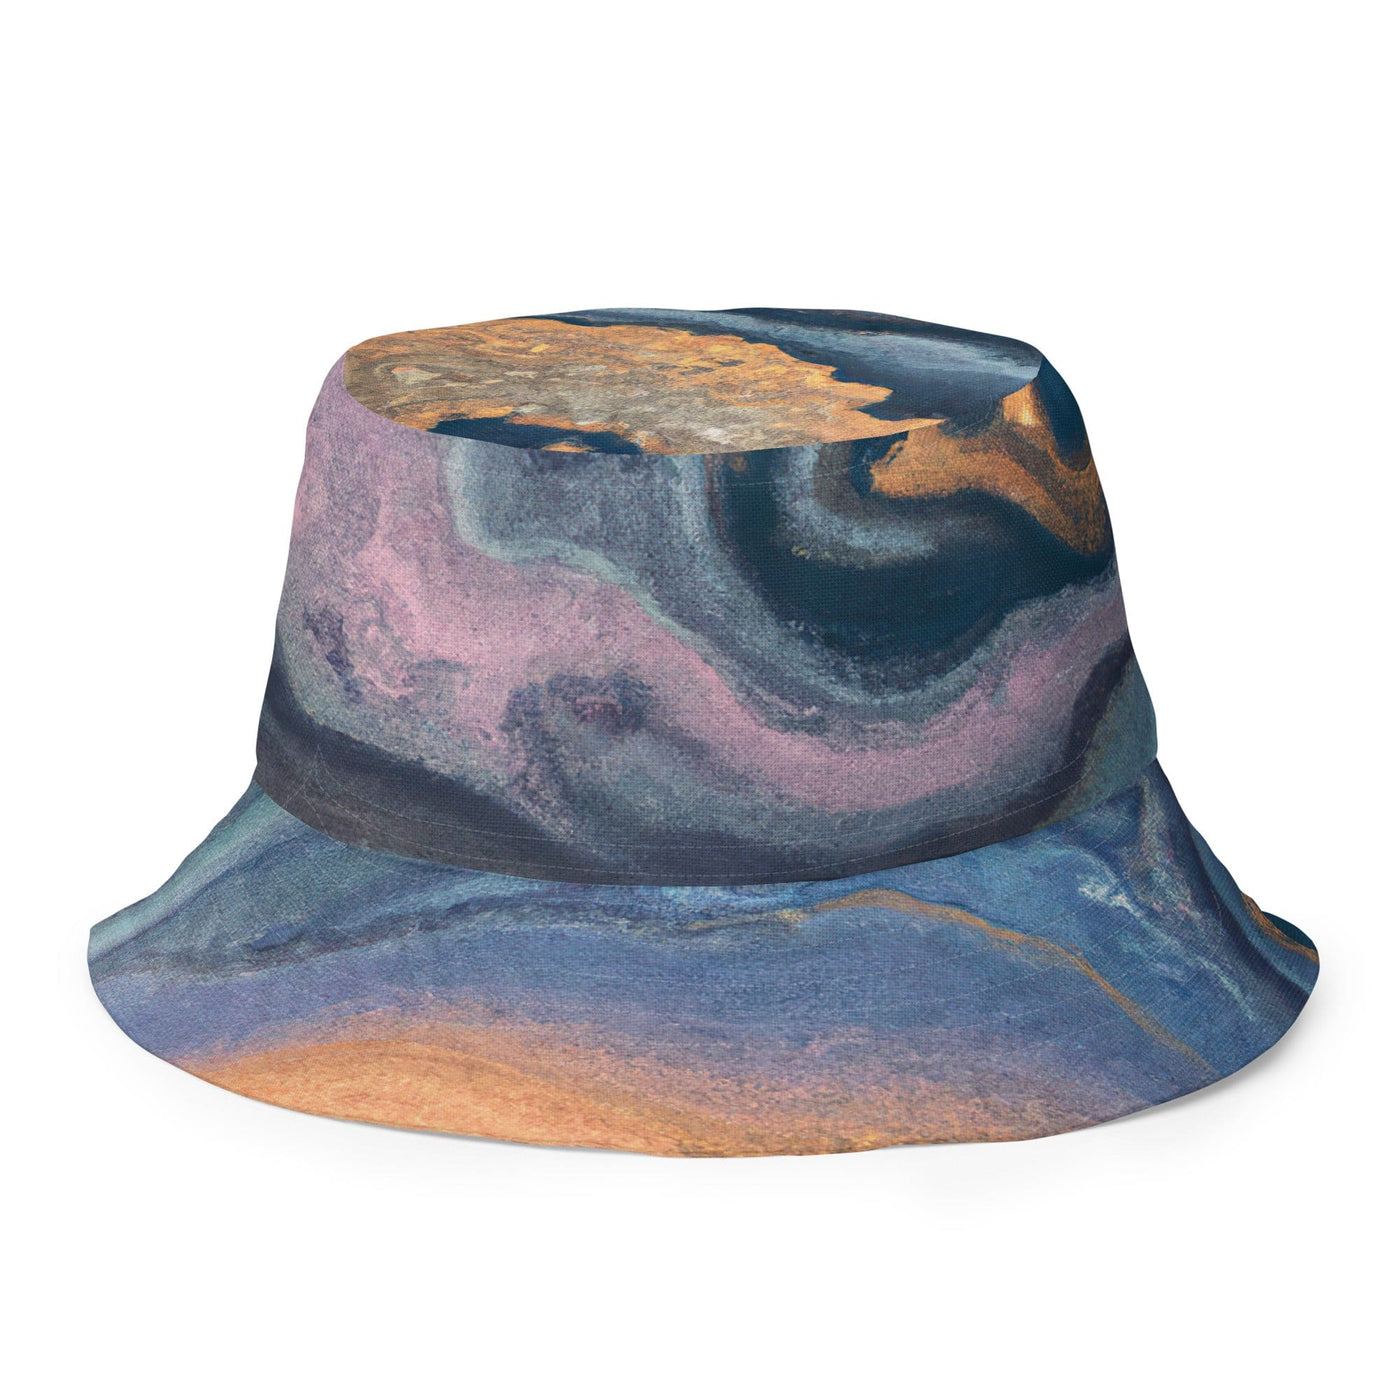 Reversible Bucket Hat Blue Pink Gold Abstract Marble Swirl Pattern - Unisex